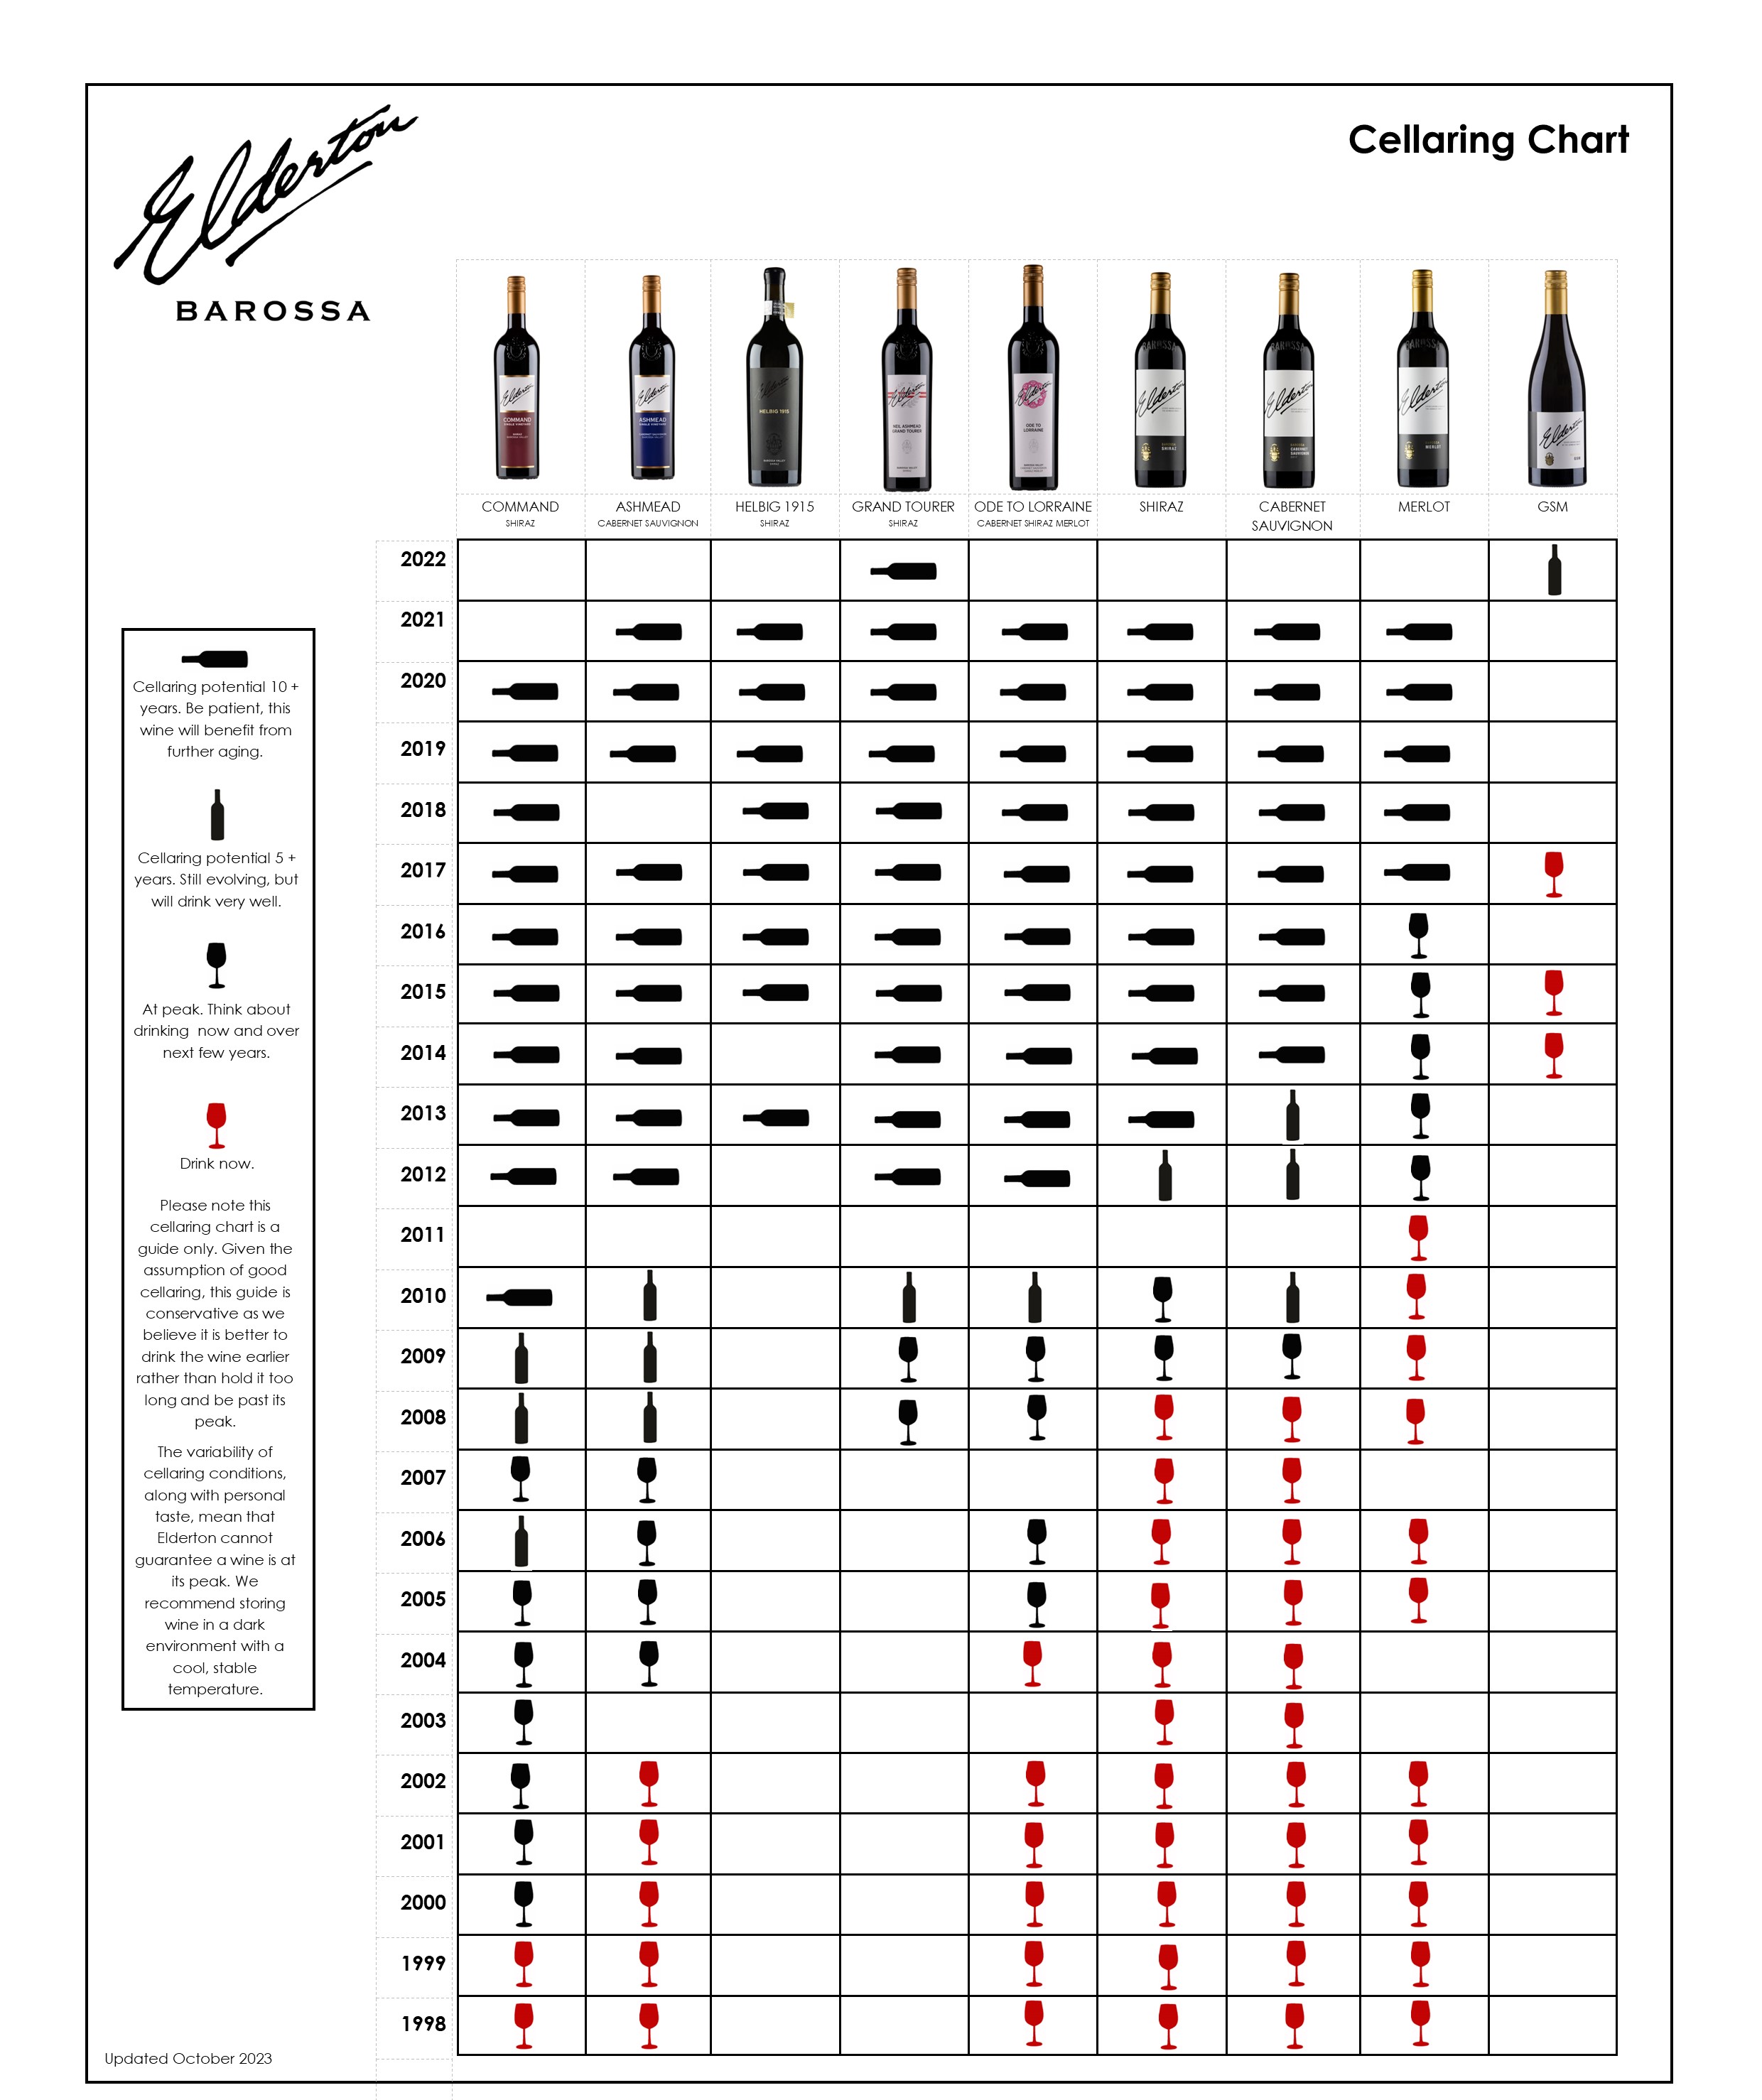 Elderton Wines Cellaring Chart - how long we suggest you can cellar your wines